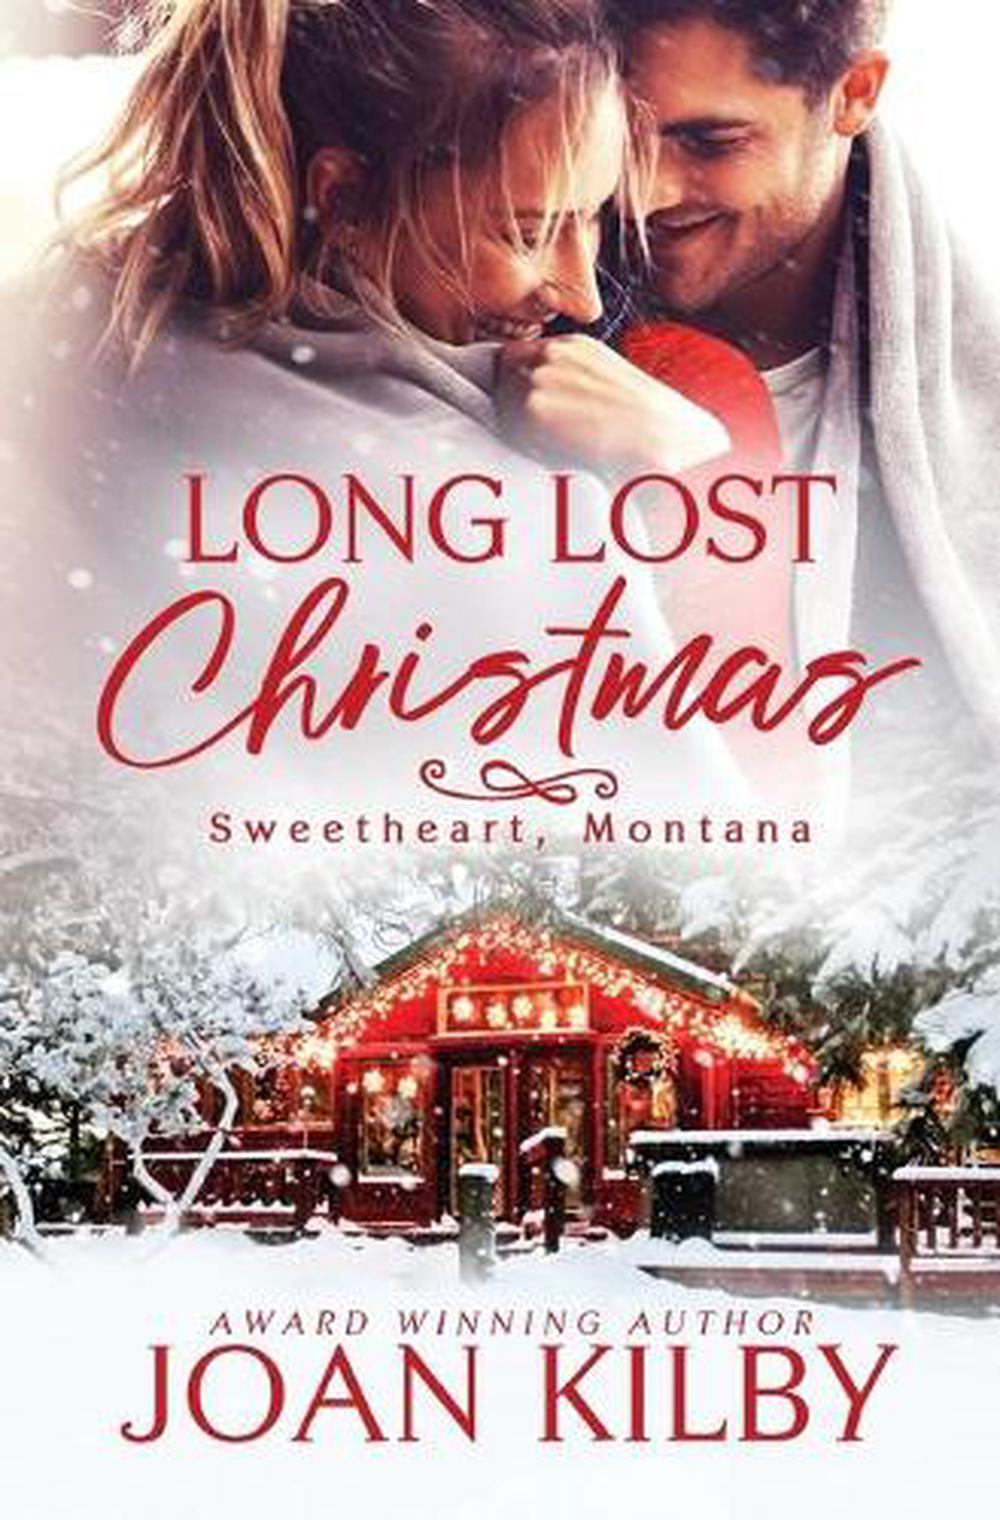 Long Lost Christmas by Joan Kilby (English) Paperback Book Free ...